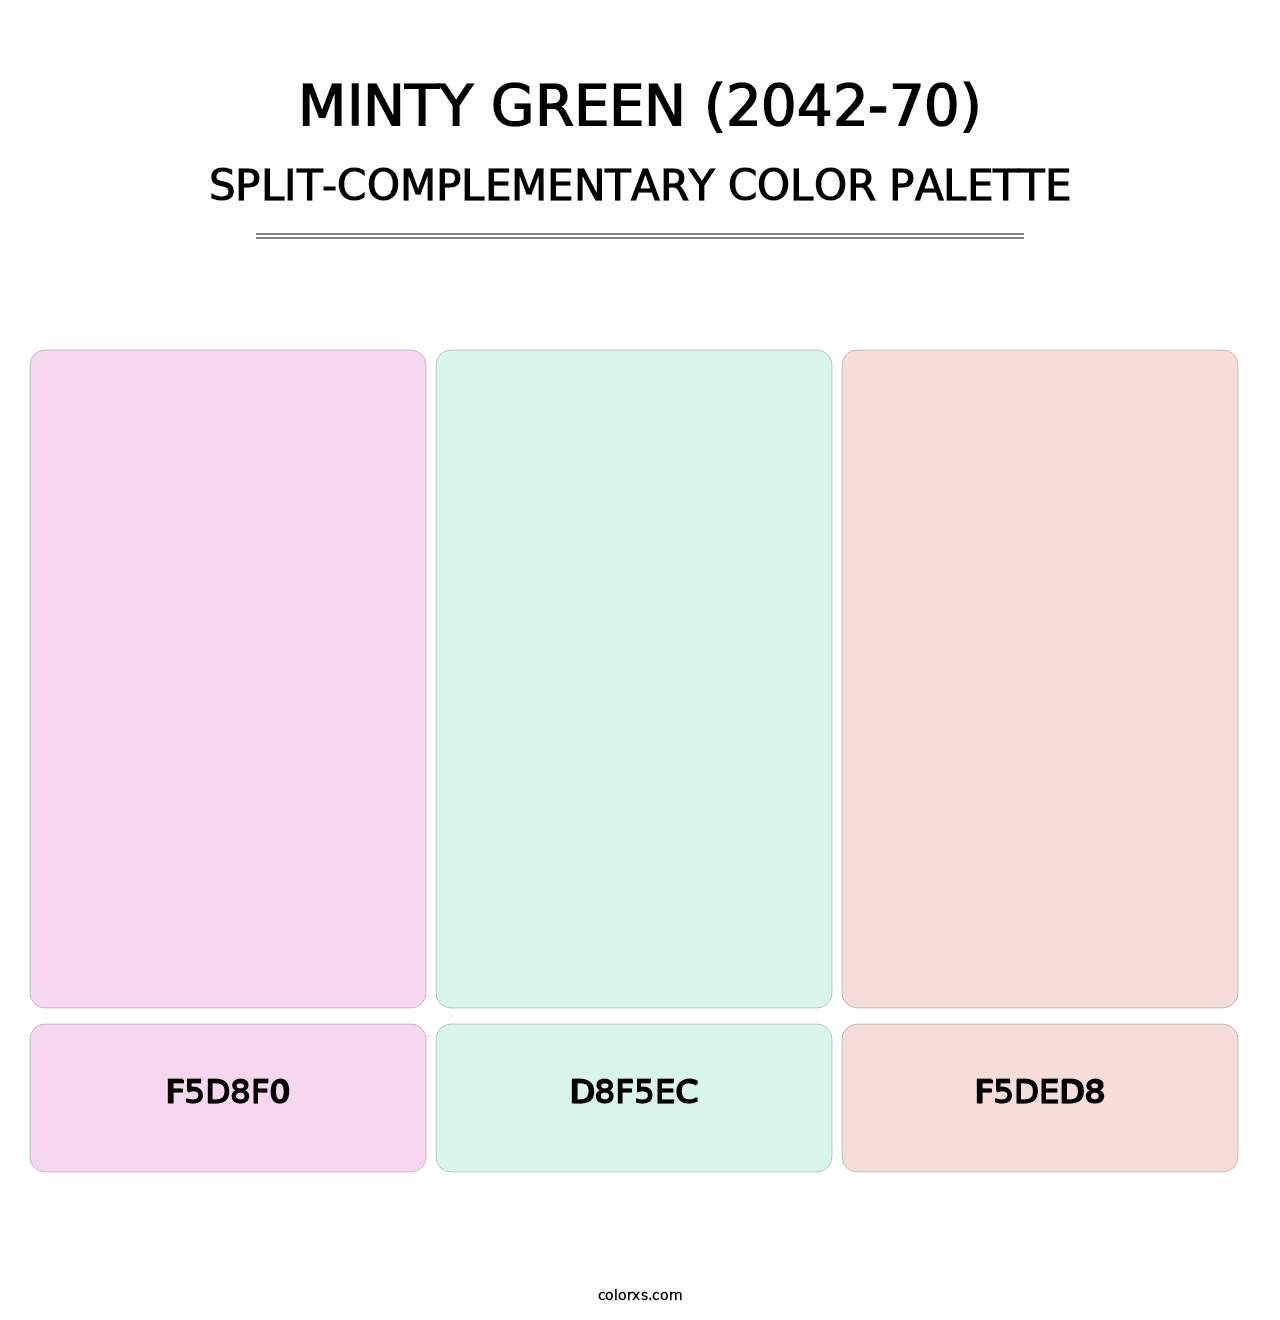 Minty Green (2042-70) - Split-Complementary Color Palette